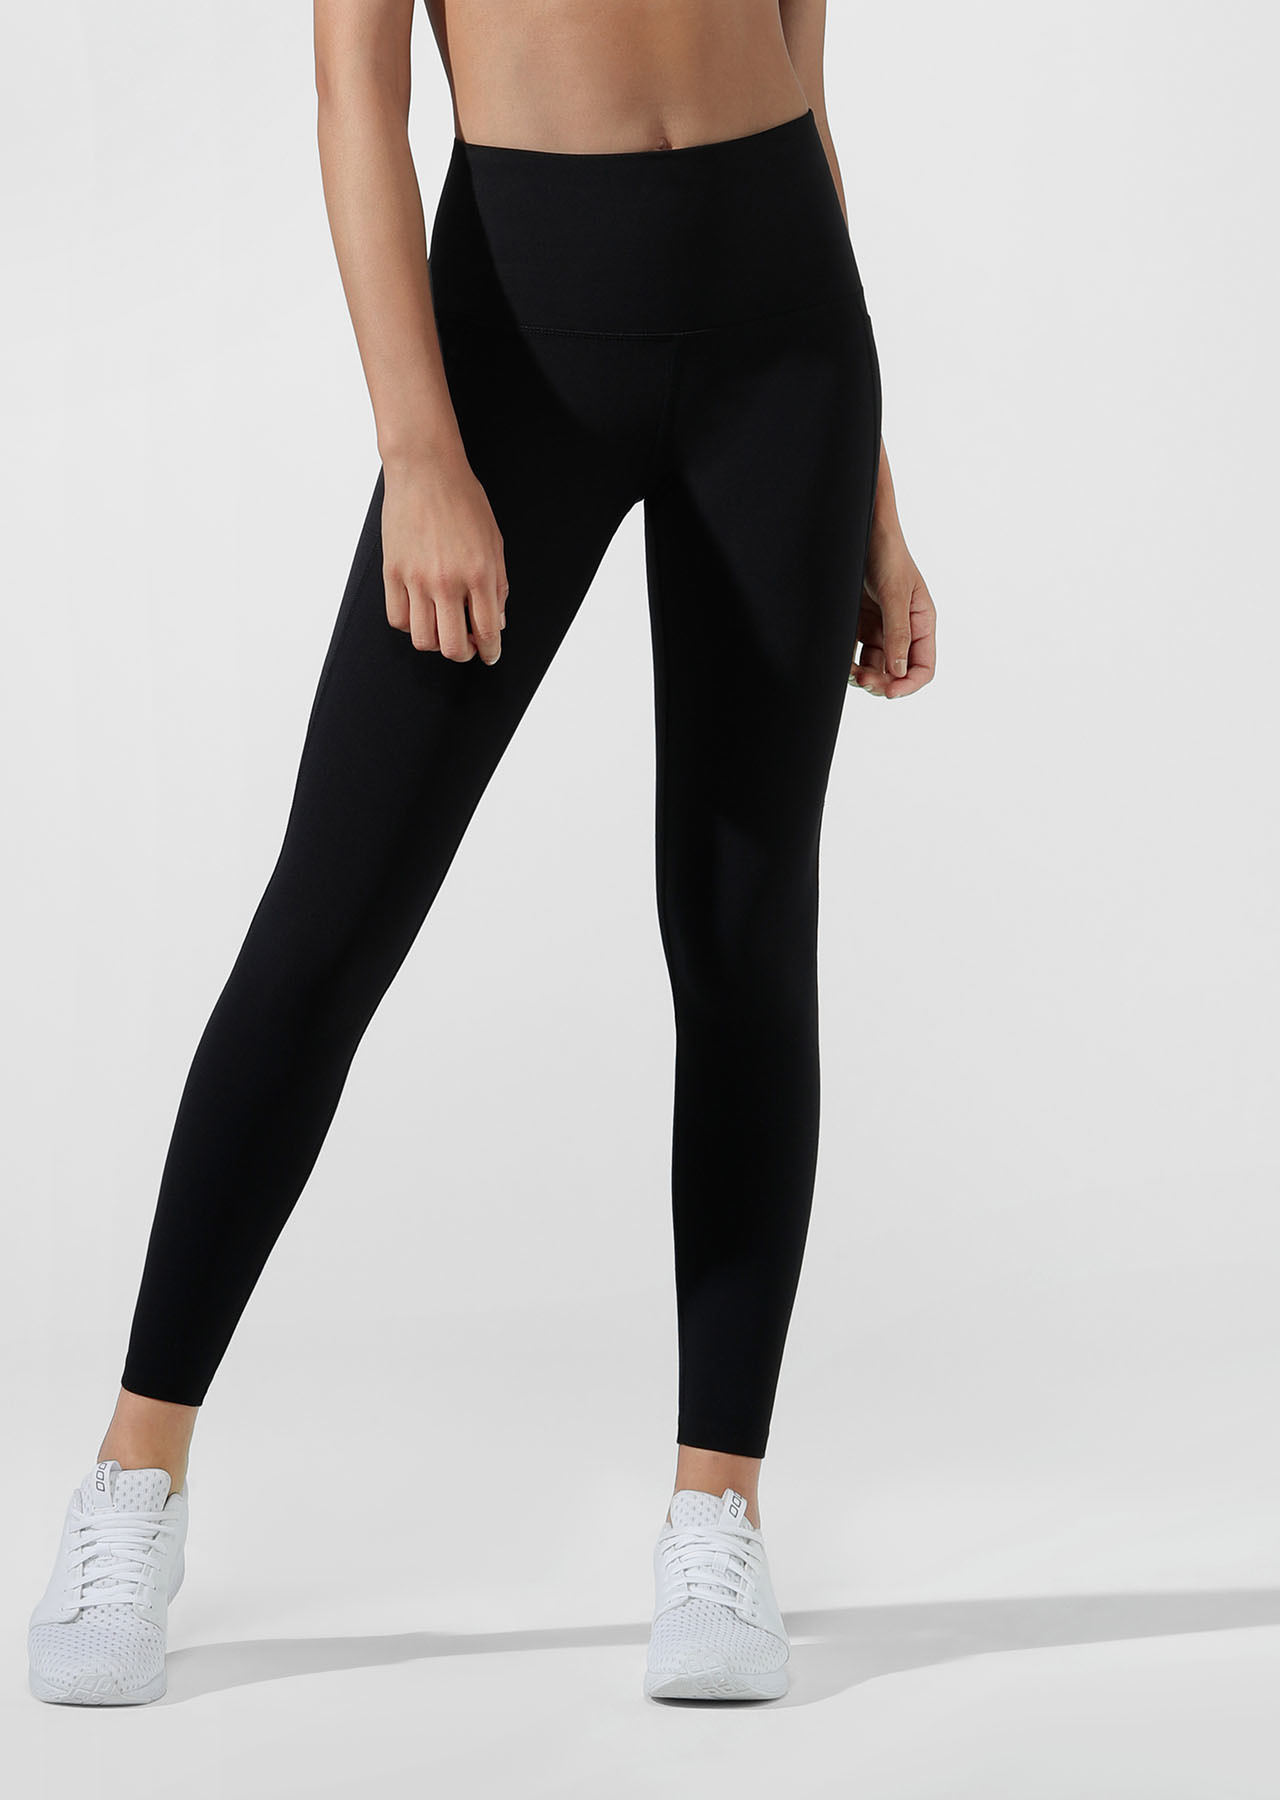 Lorna Jane Active - Run, don't walk… Our Full Length Amy Tights are $60  each for 2 days only! It's going to be a TIGHT race into store or online  ->> www.lornajane.com.au